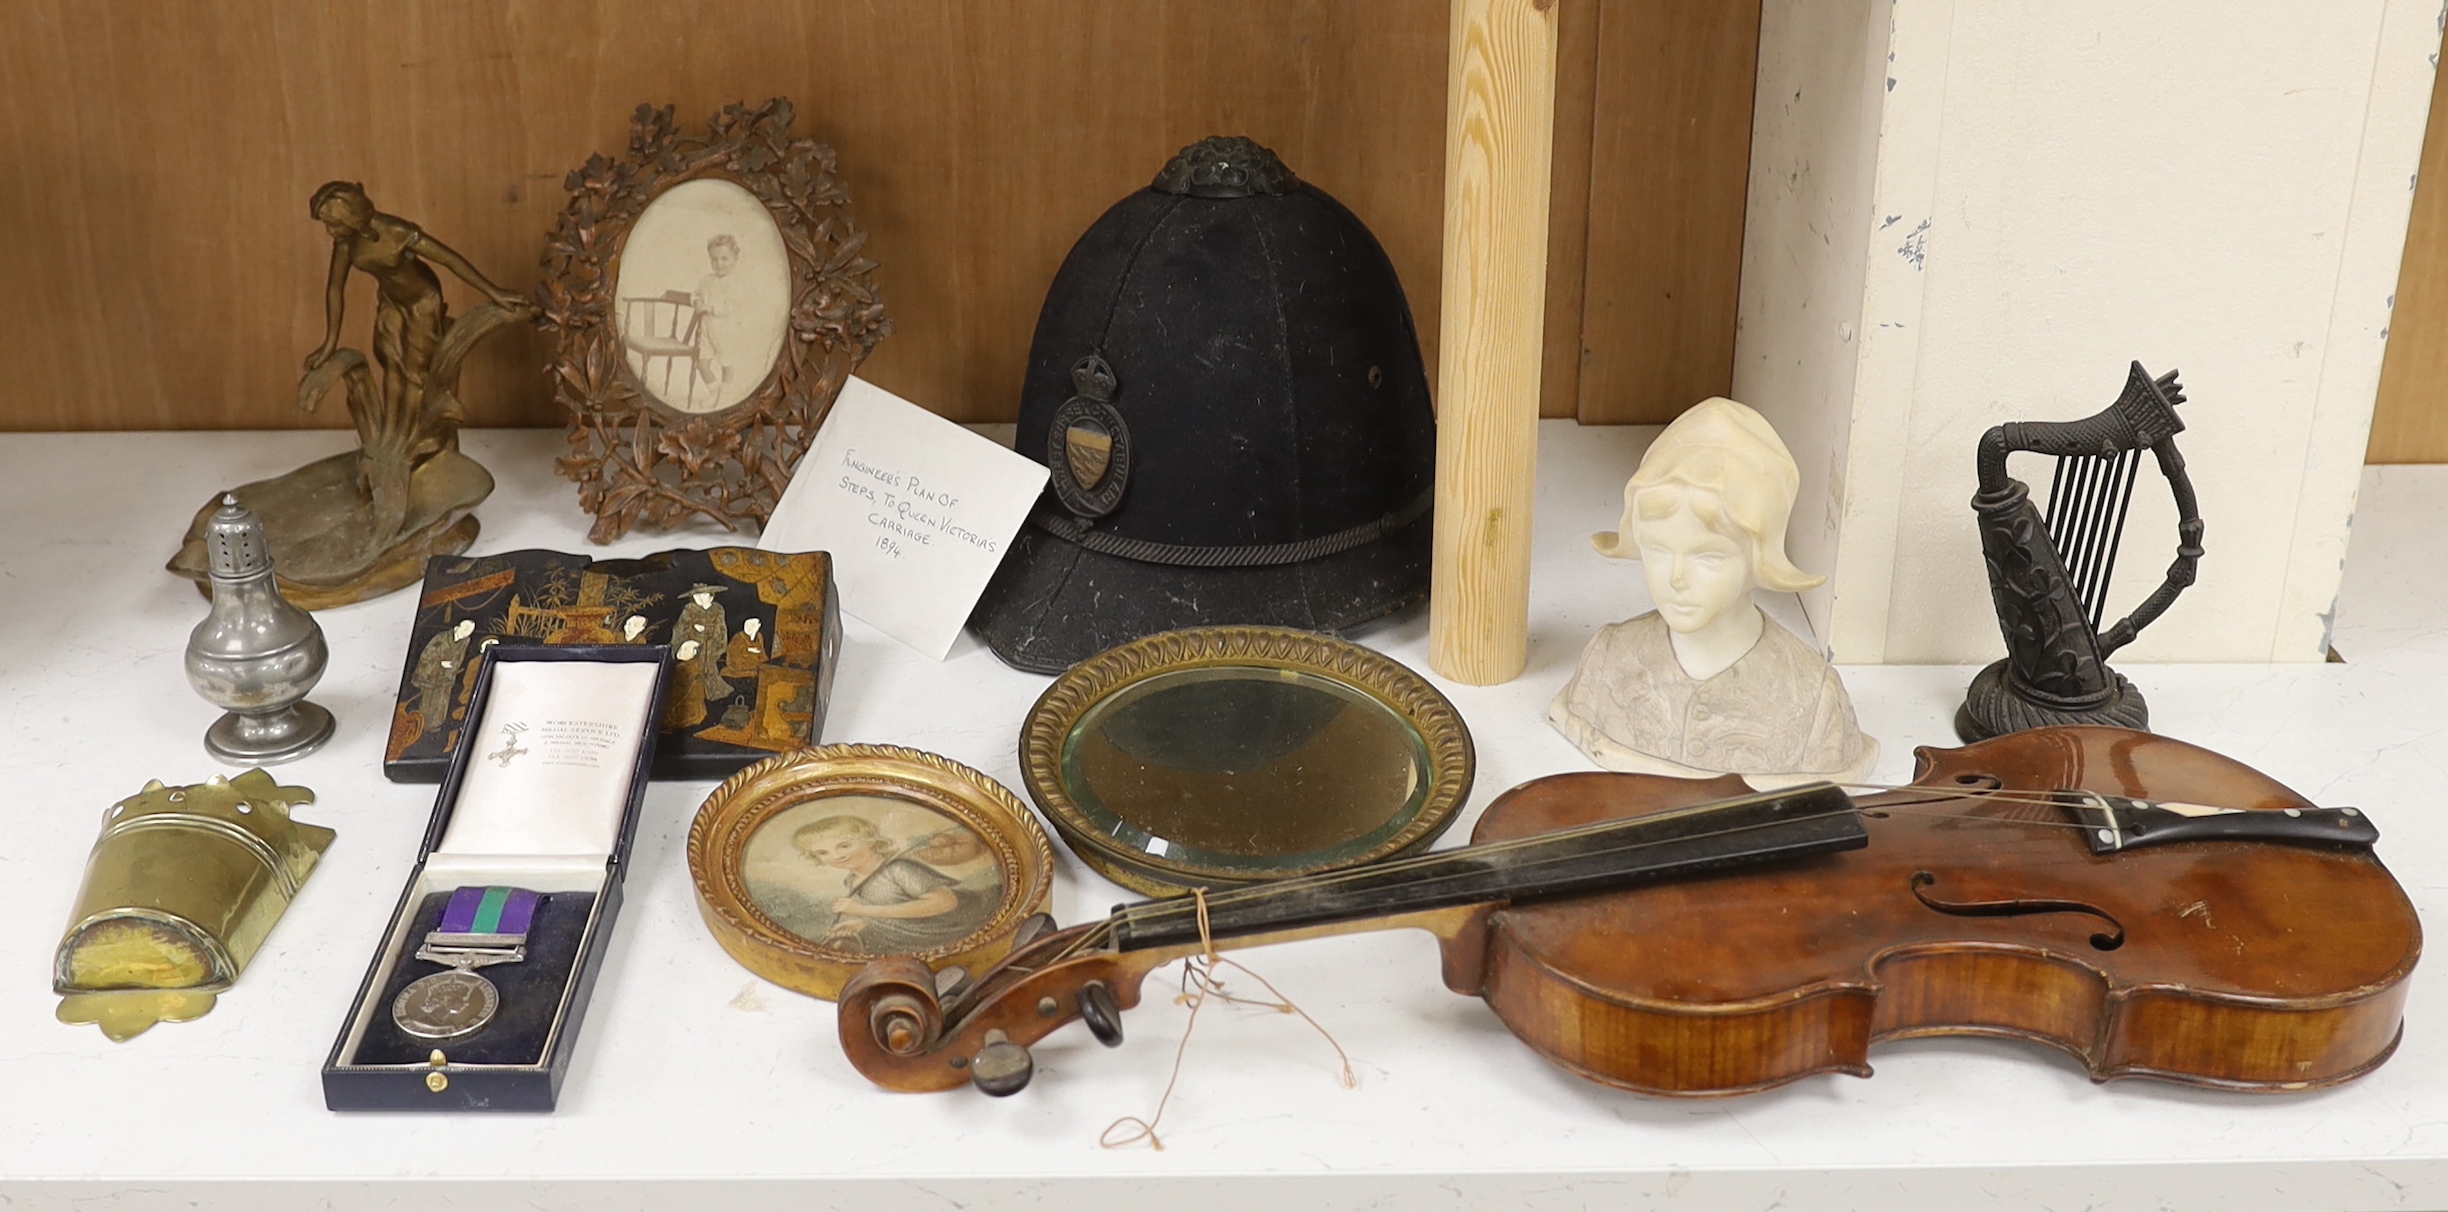 Mixed collectables - An early 20th century violin, interior label reads ‘Nicolaus Amatus fecit in Cremona 1651 Made in Czechoslavia’, an QEII General Service medal, CANAL ZONE bar, to AC1 P G DARLINGTON (2523204) RAF, a